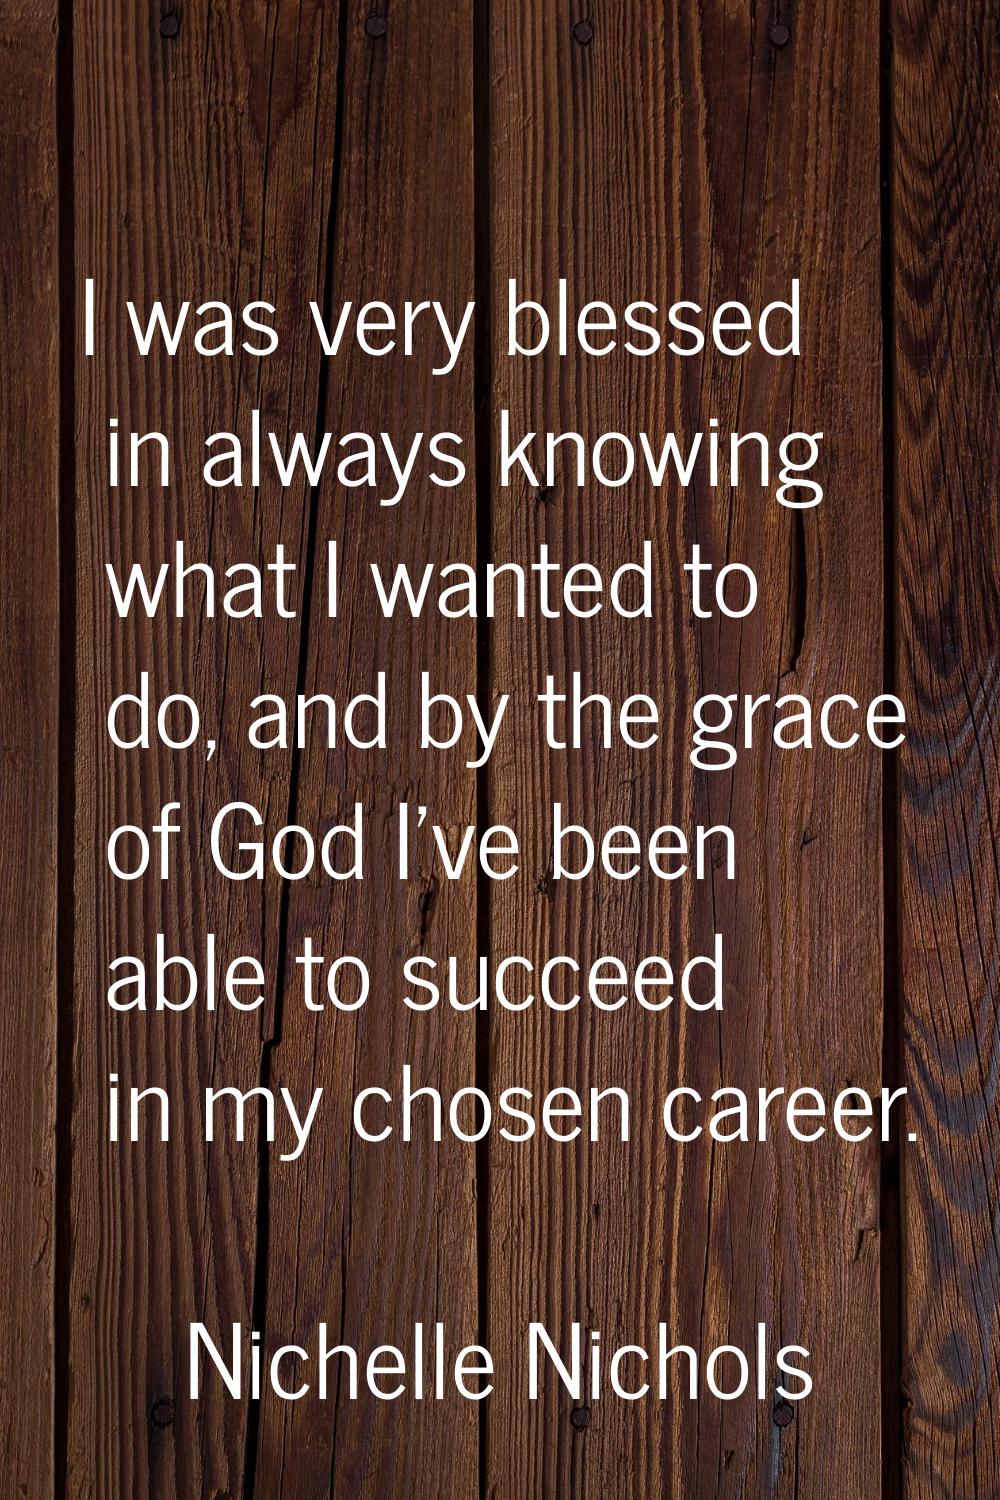 I was very blessed in always knowing what I wanted to do, and by the grace of God I've been able to